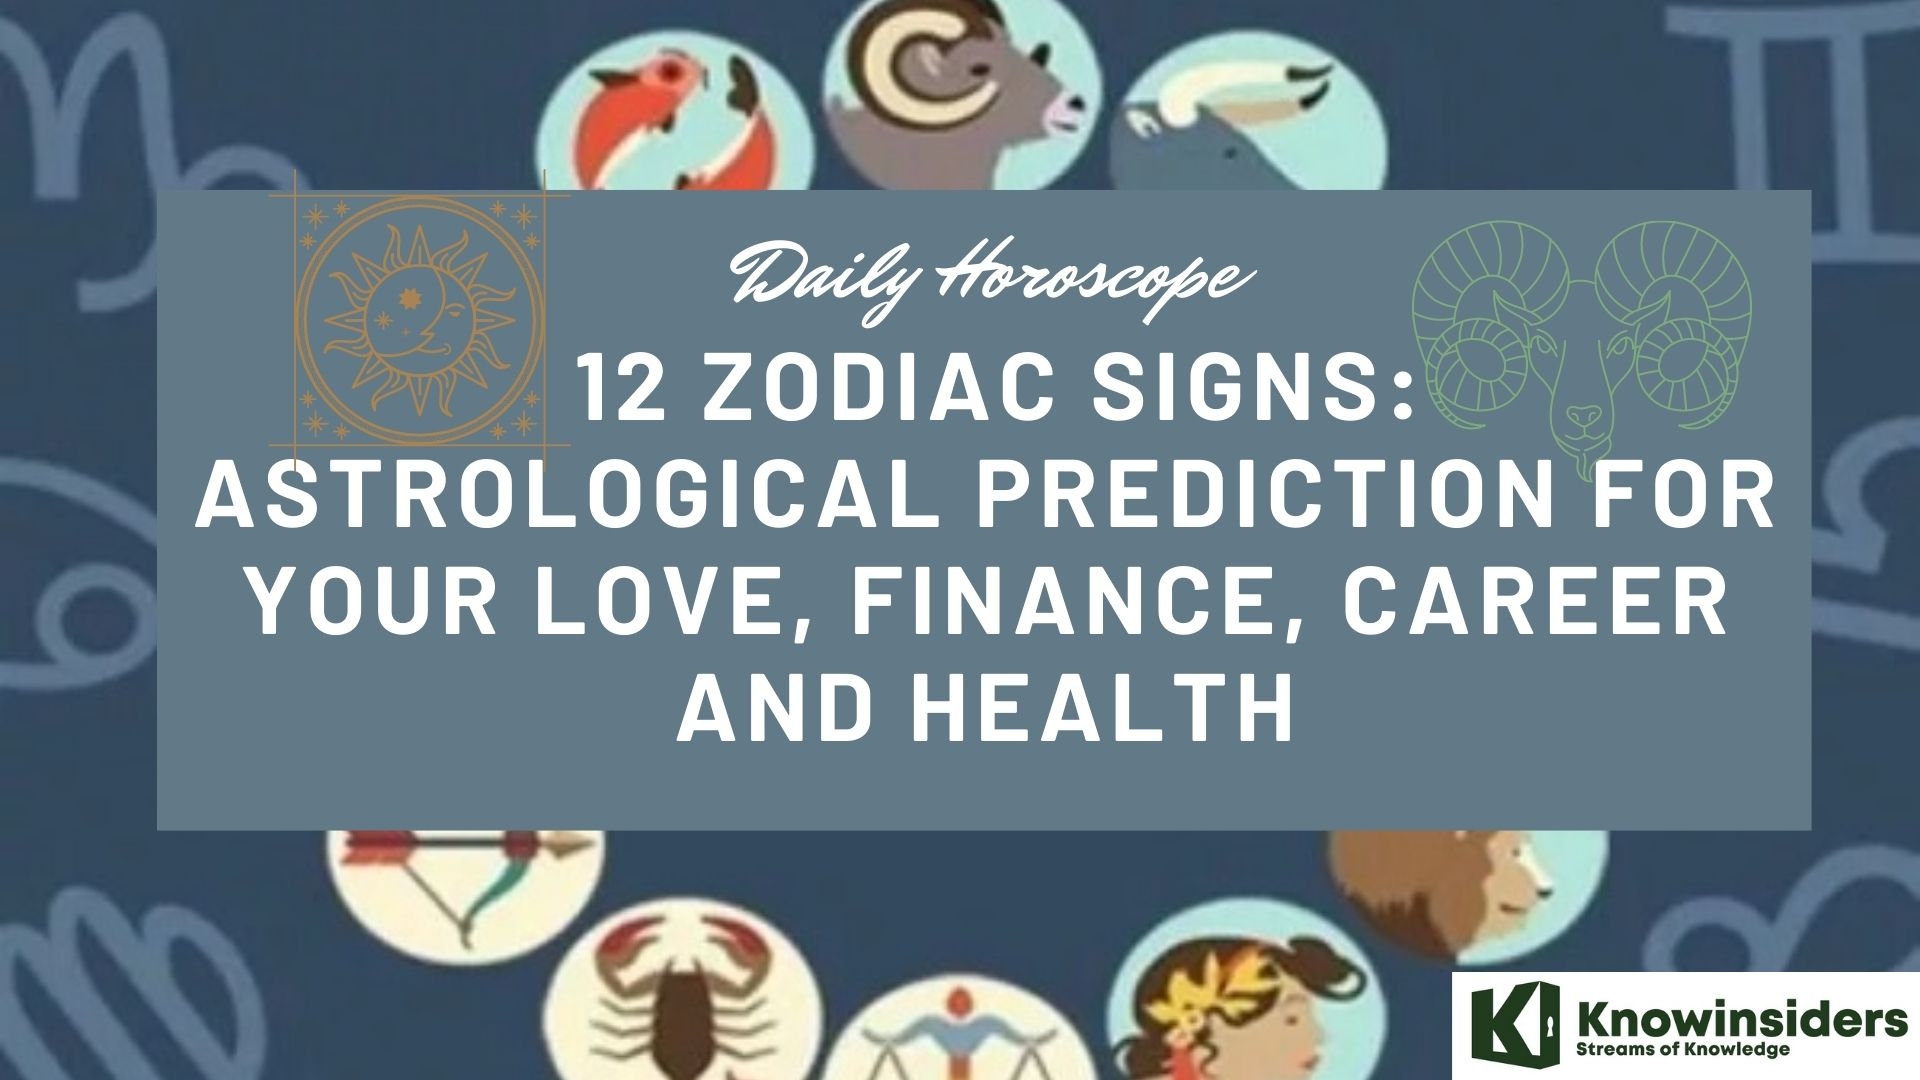 Daily Horoscope (May 29, 2022) of 12 Zodiac Signs: Astrological Prediction for Your Love, Finance, Career and Health